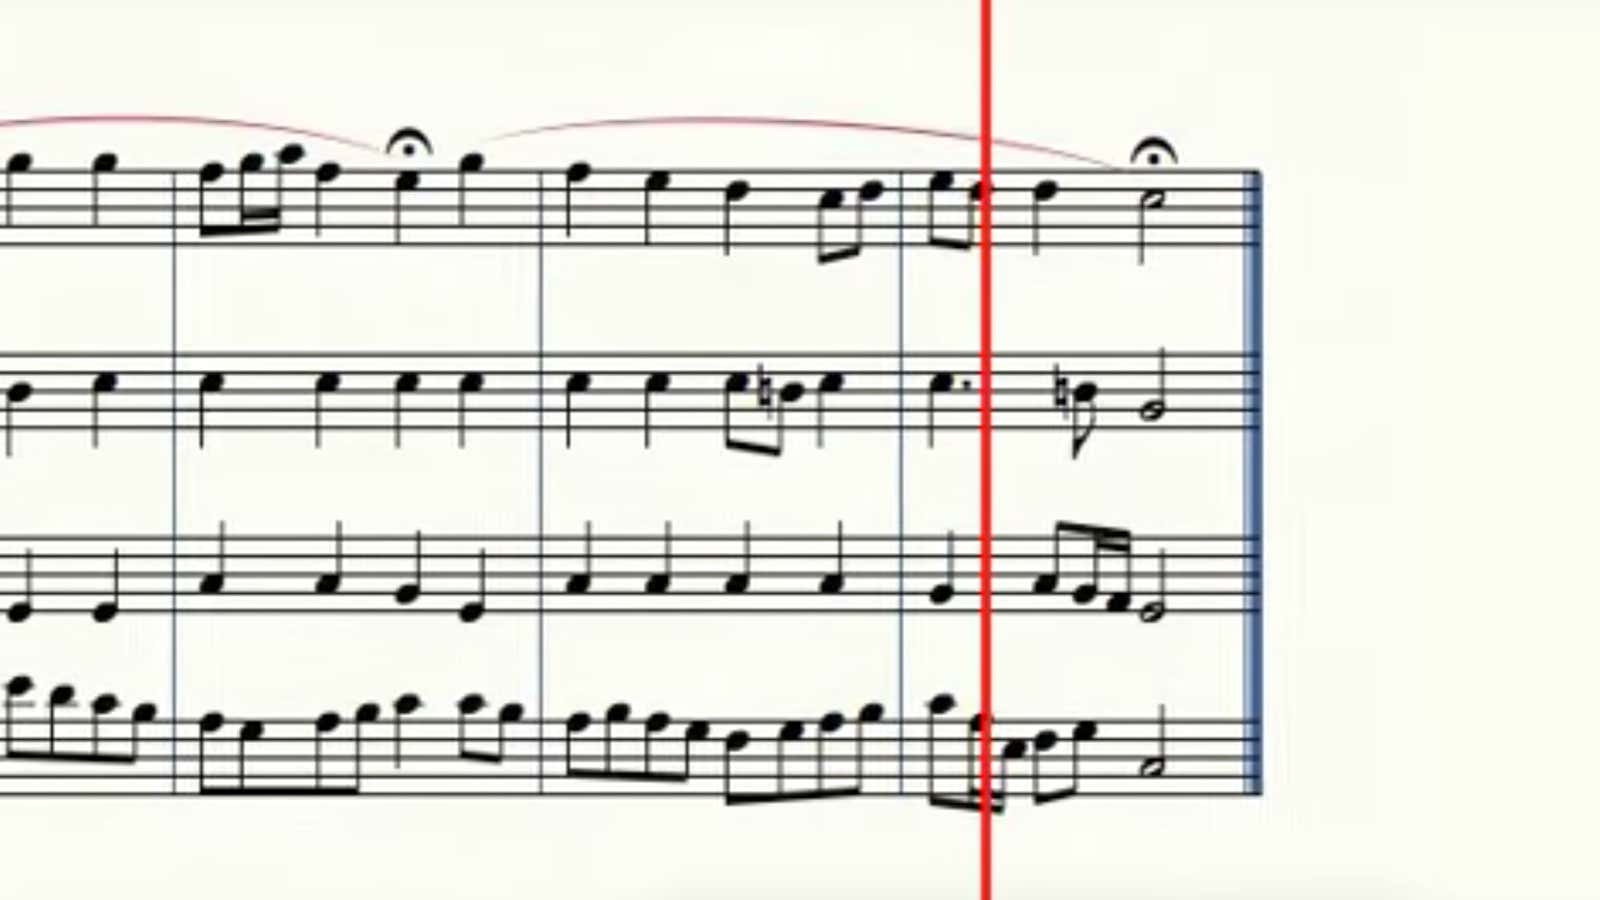 You probably can’t tell the difference between Bach and music written by AI in his style